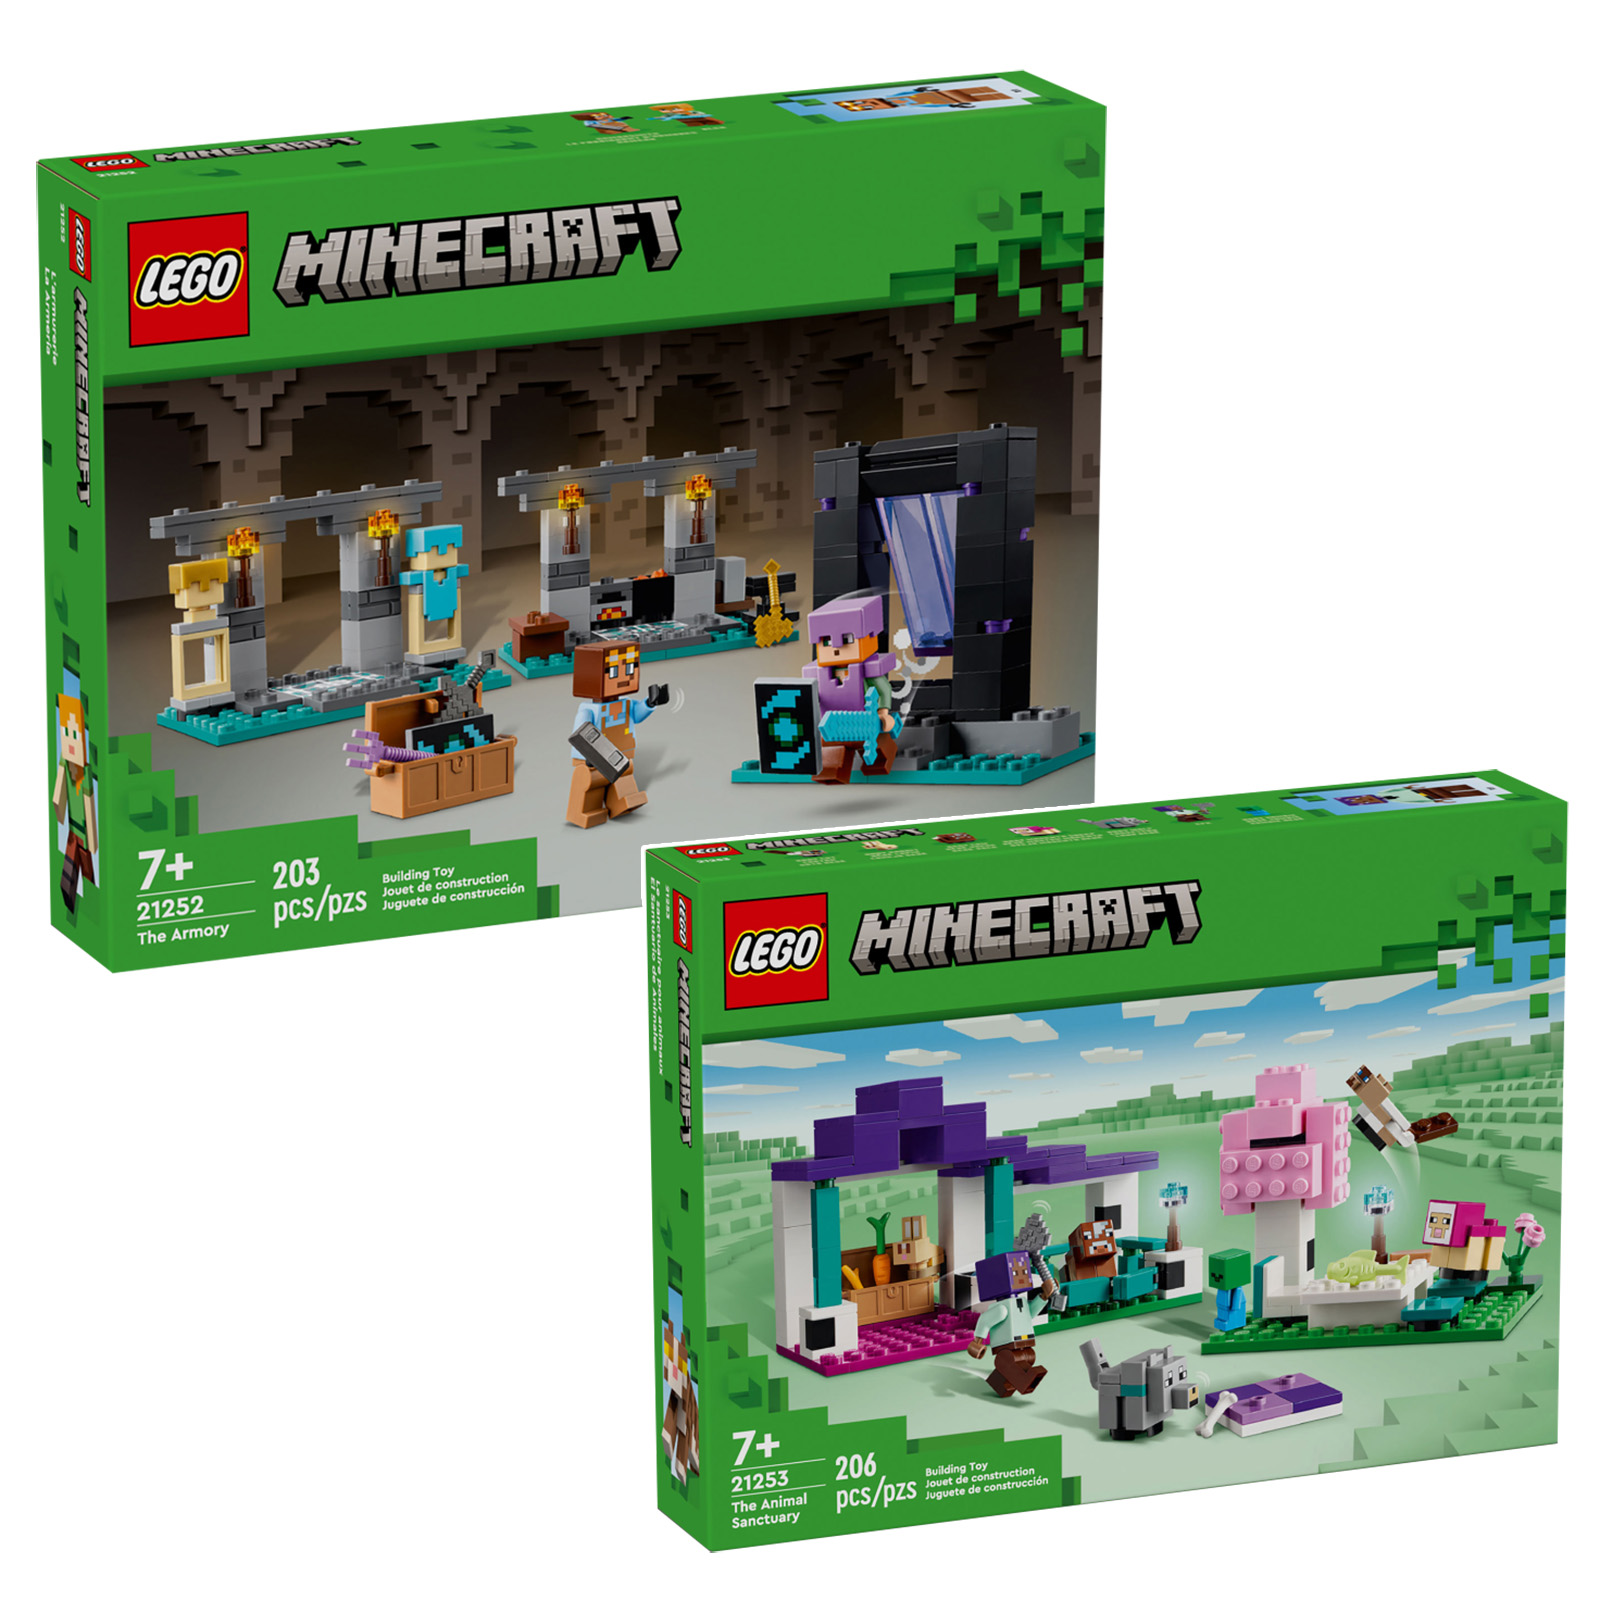 New LEGO Minecraft 2024 items sets 21252 The Armory and 21253 The